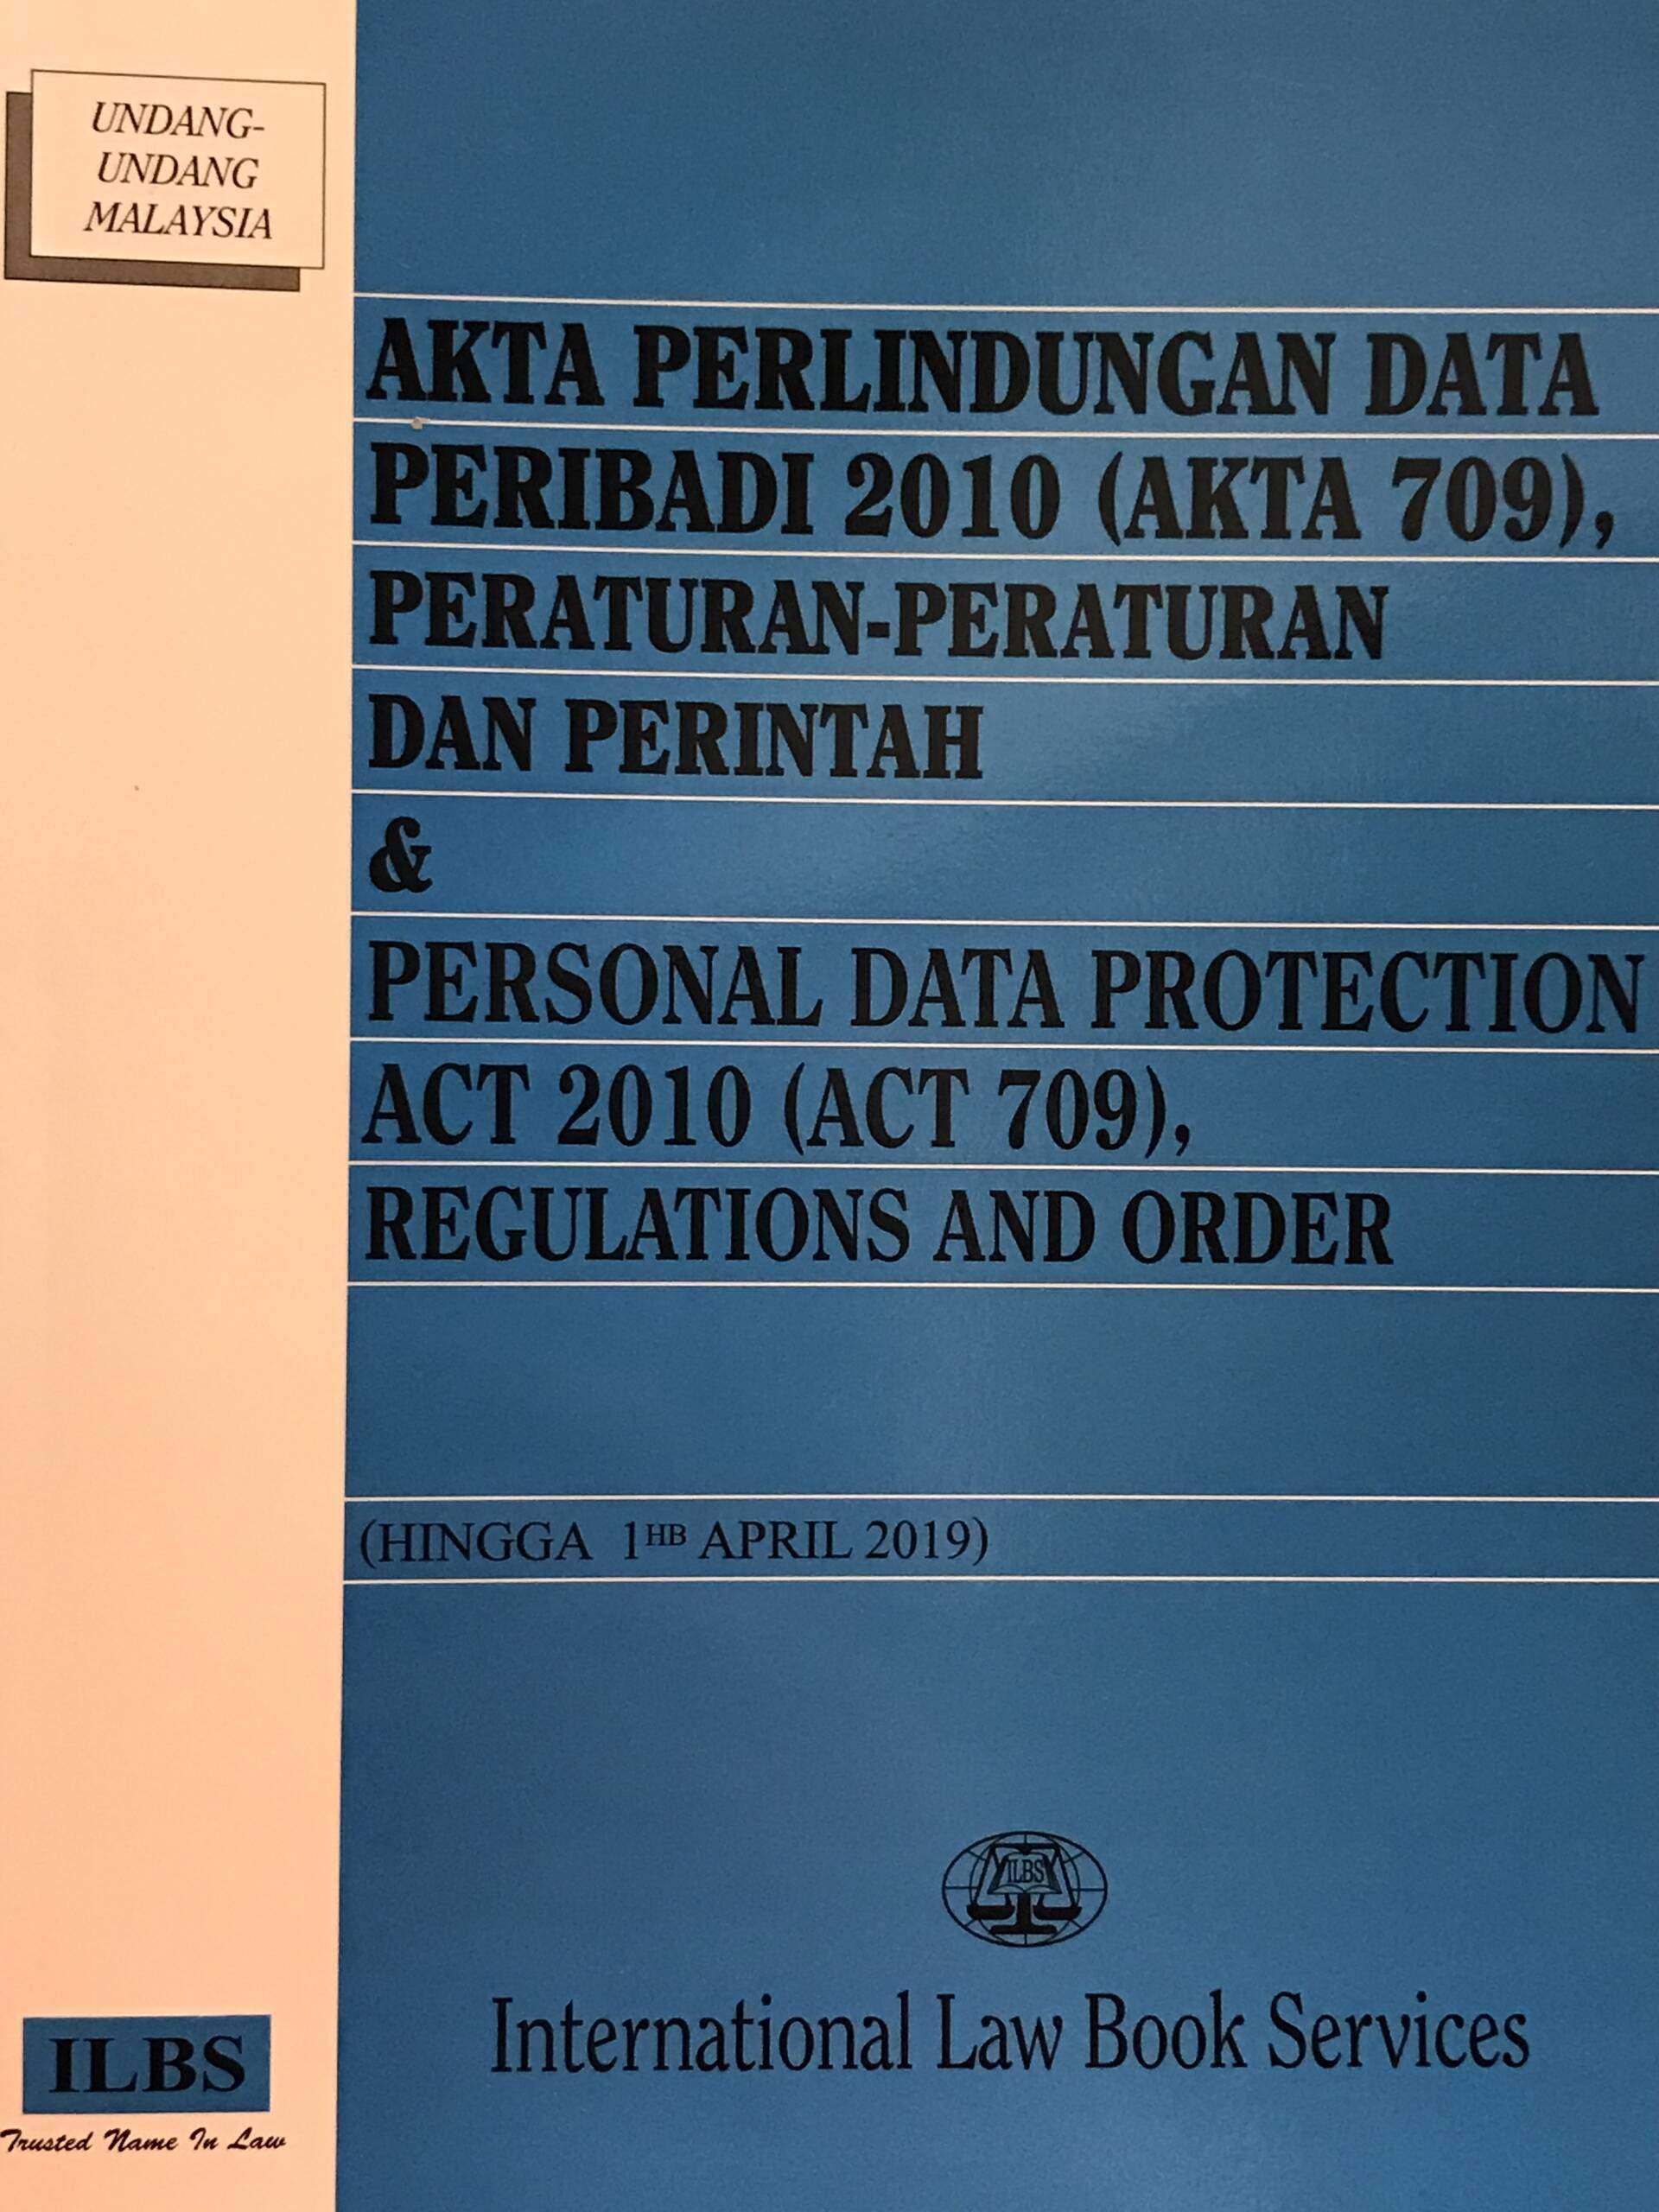 personal data protection act 2010 malaysia